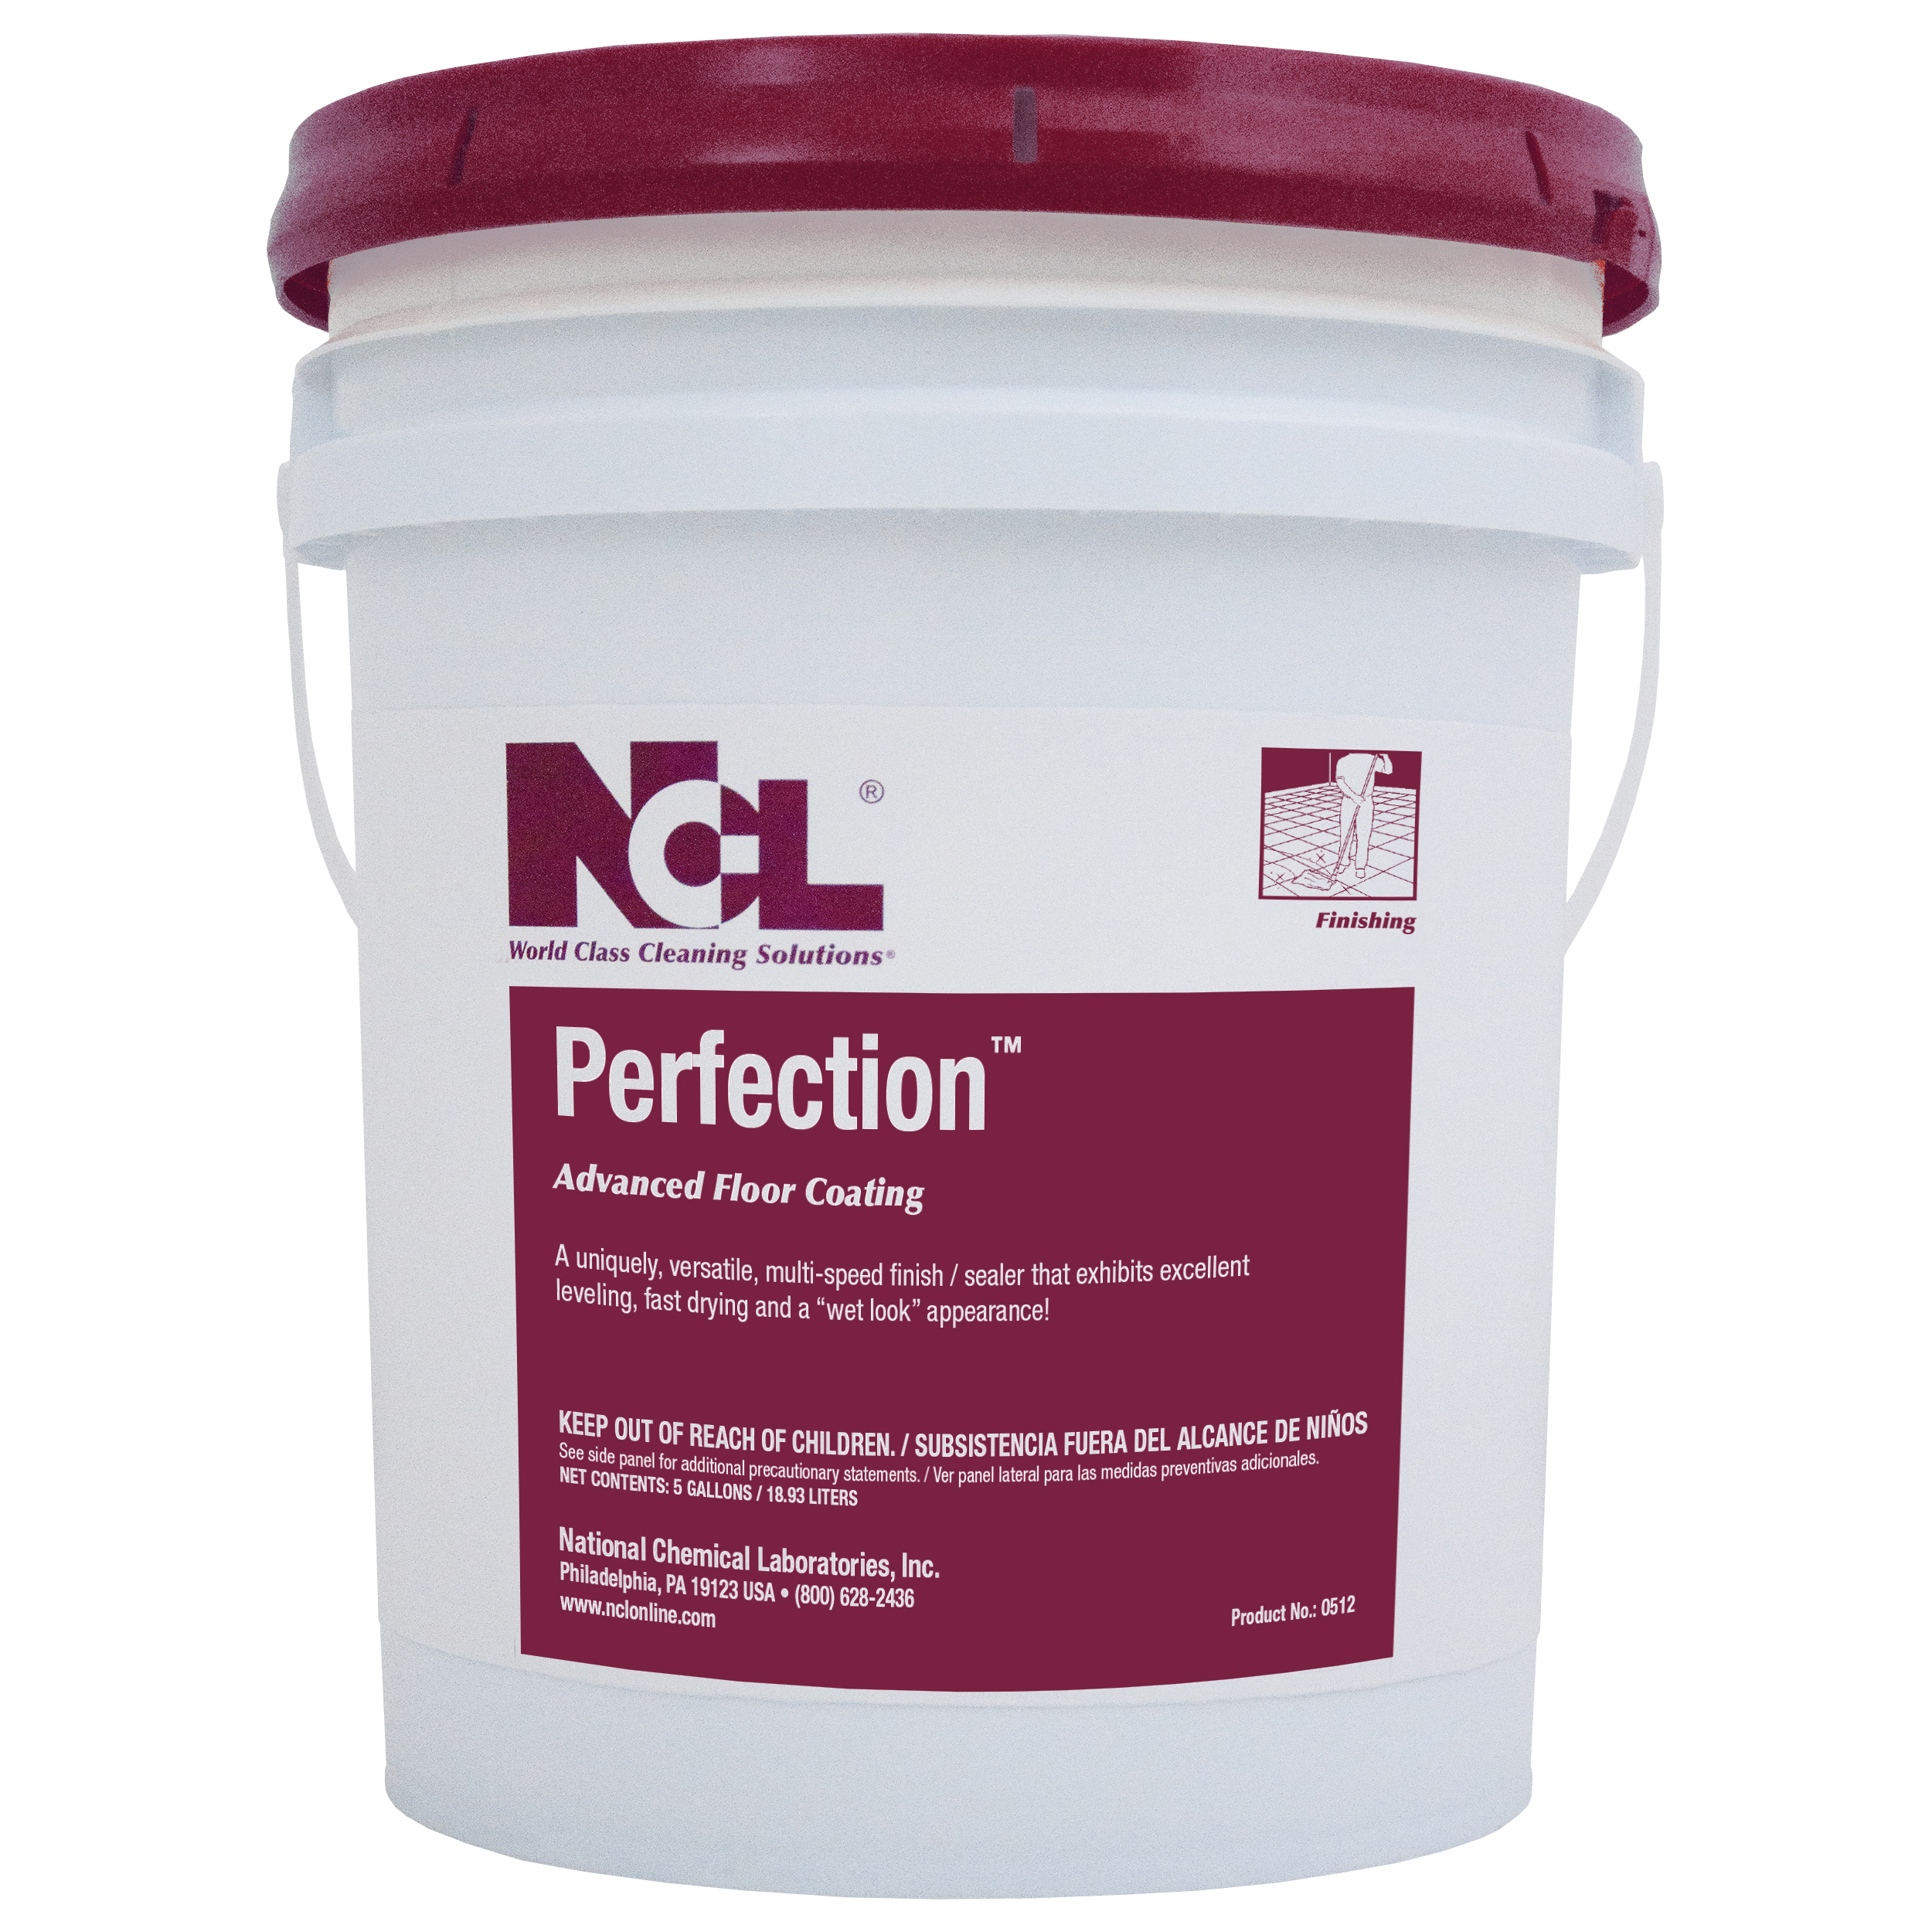  PERFECTION Advanced Floor Coating 5 Gal. Pail (NCL0512-21) 